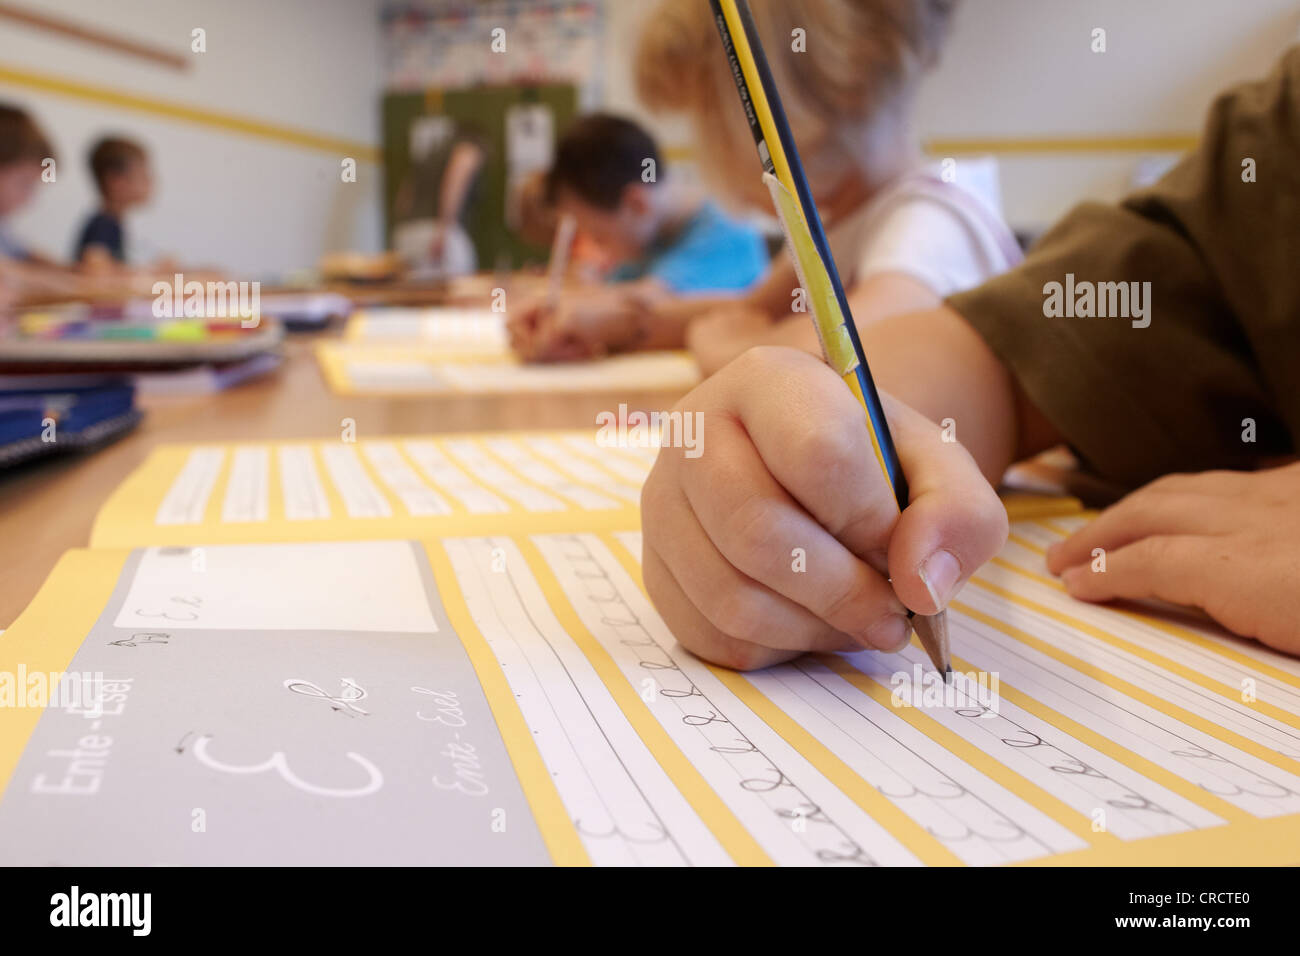 Students of the second grade of elementary school learning how to write, cursive handwriting, Niederwerth, Rhineland-Palatinate Stock Photo